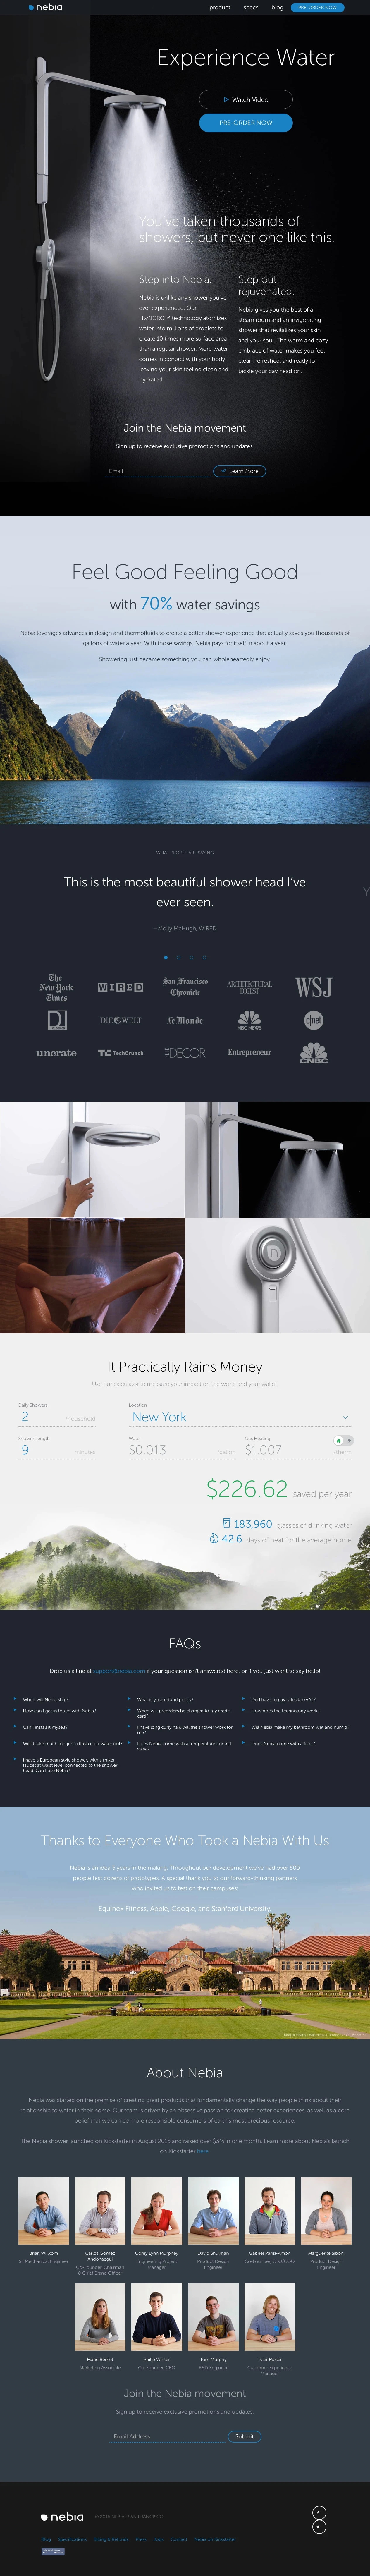 Nebia Shower Landing Page Example: You’ve taken thousands of showers, but never one like this.